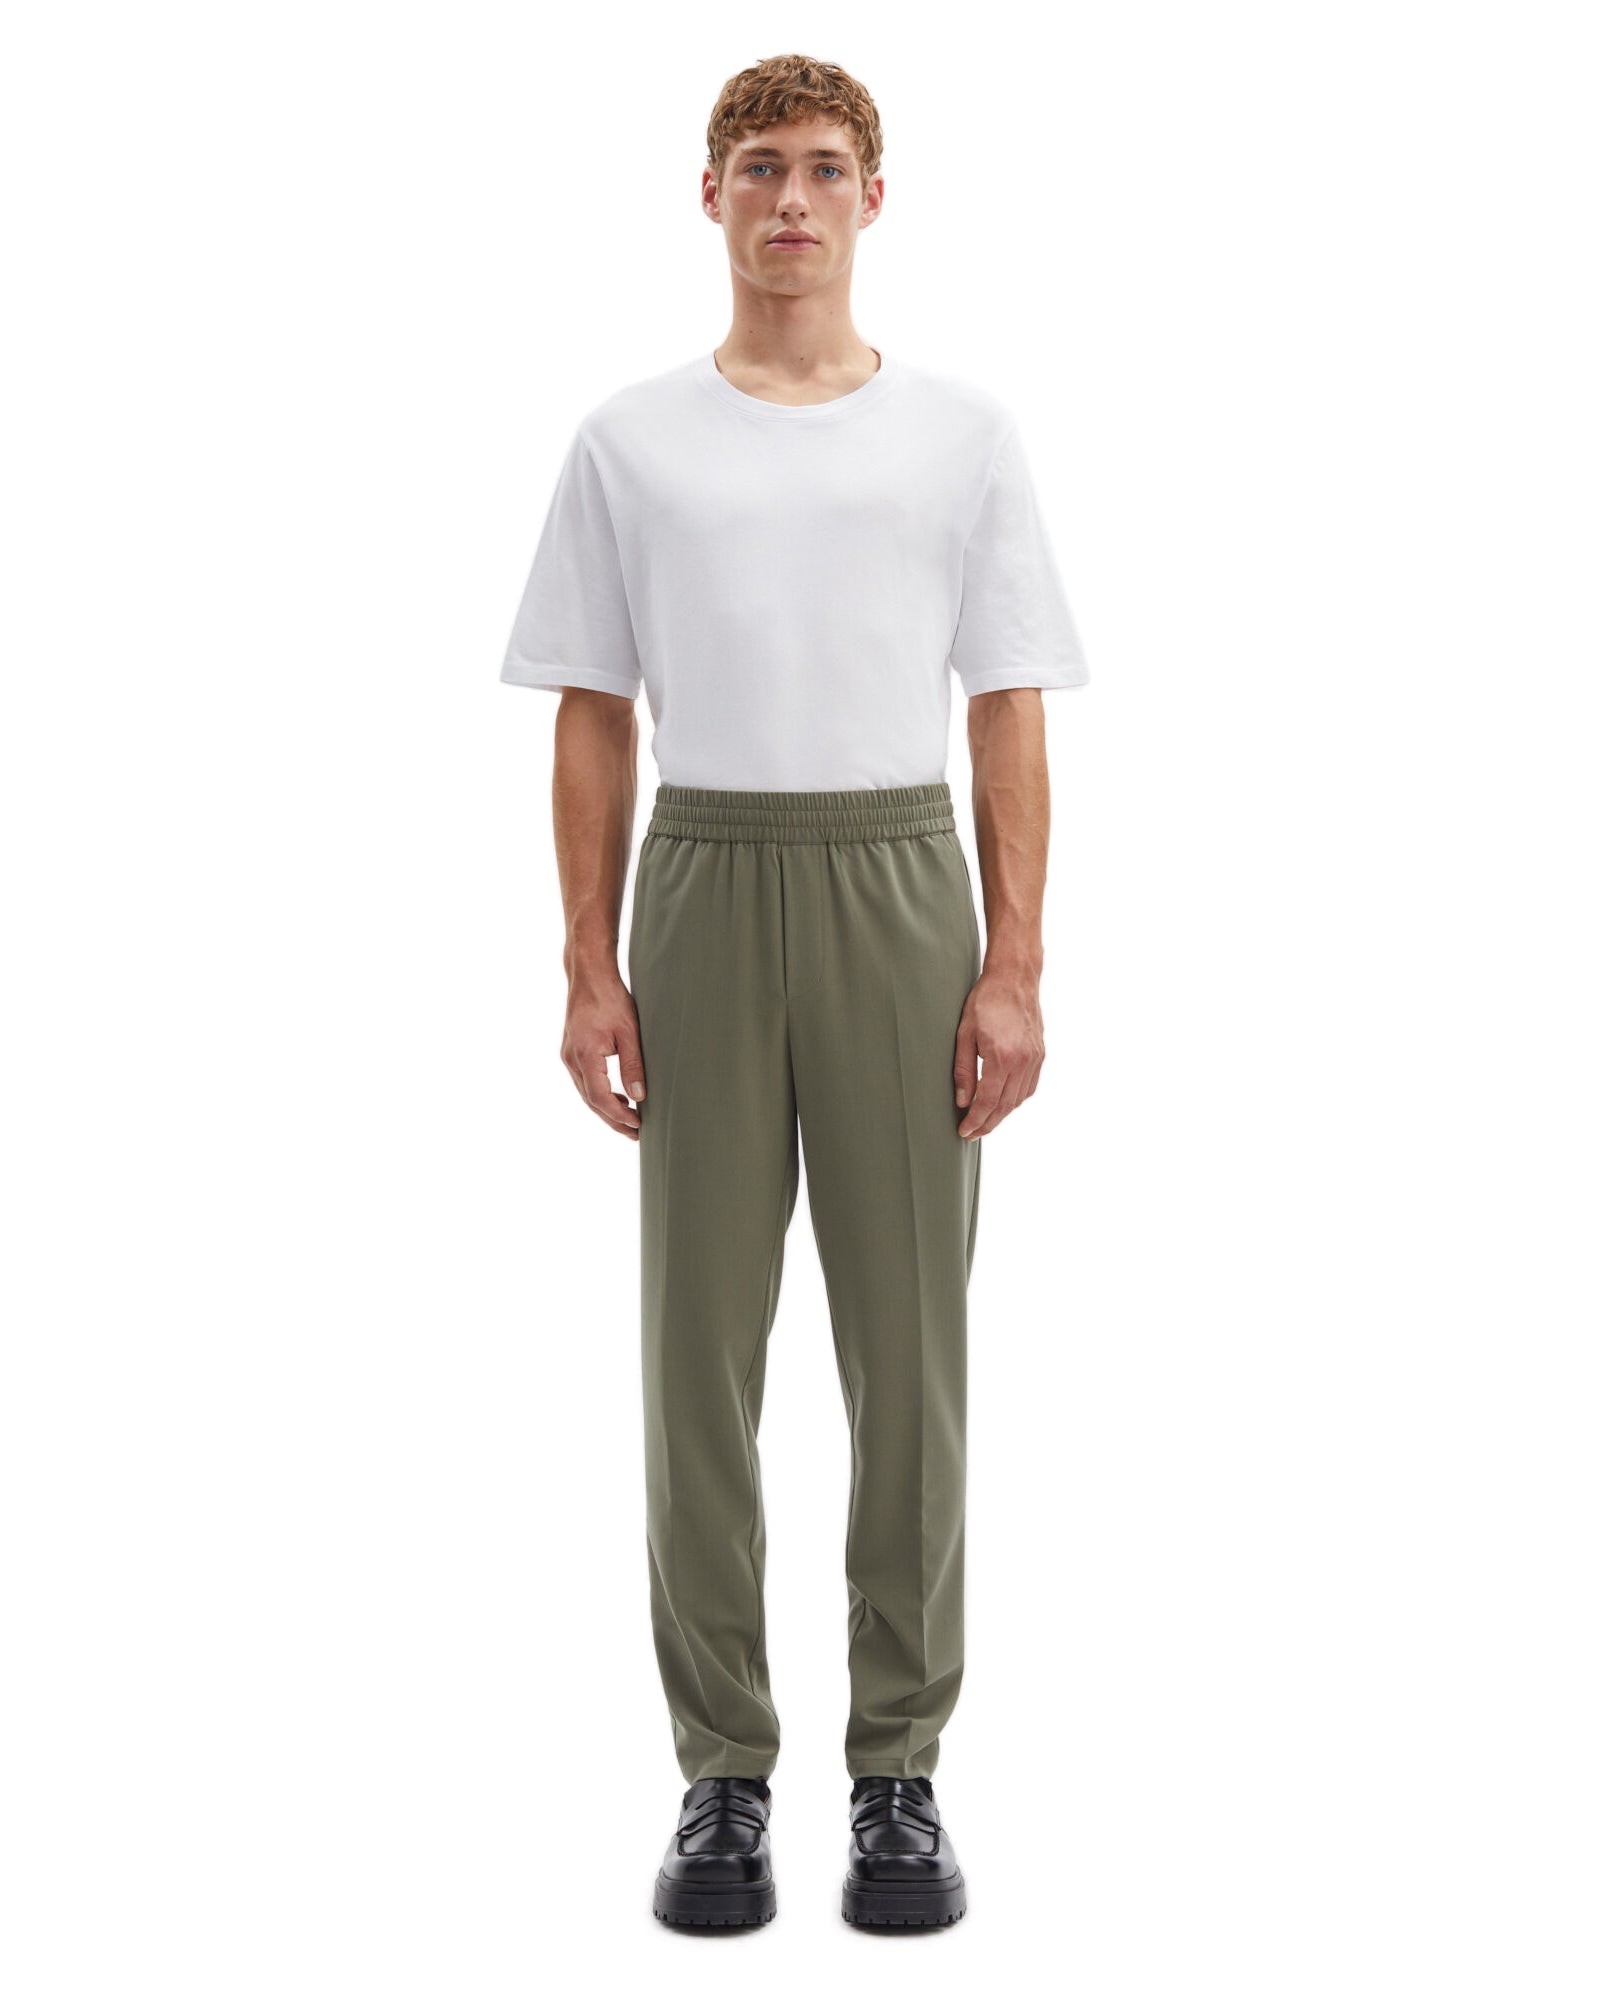 Smithy Trousers 10821 - Dusty Olive